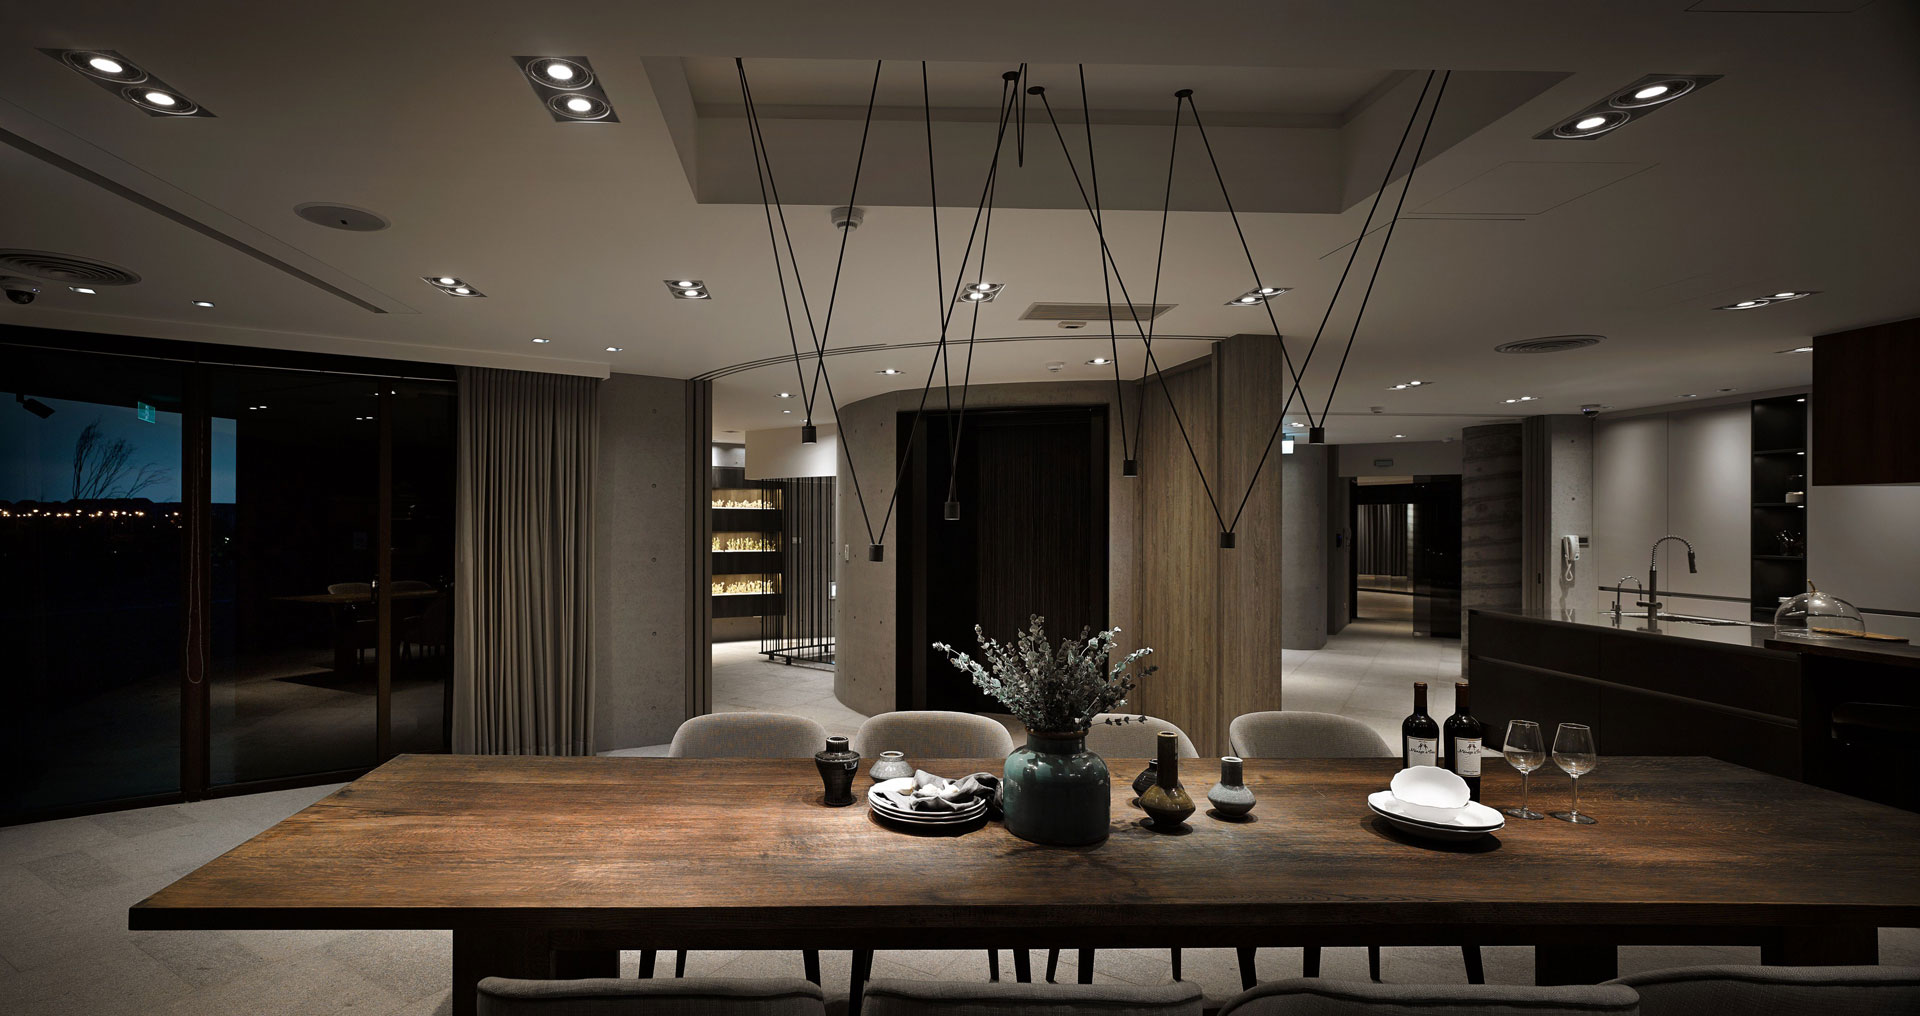 Vibia The edit - Vibia Lighting Lends an Organic Look to a Nature-Inspired Community Space - Match